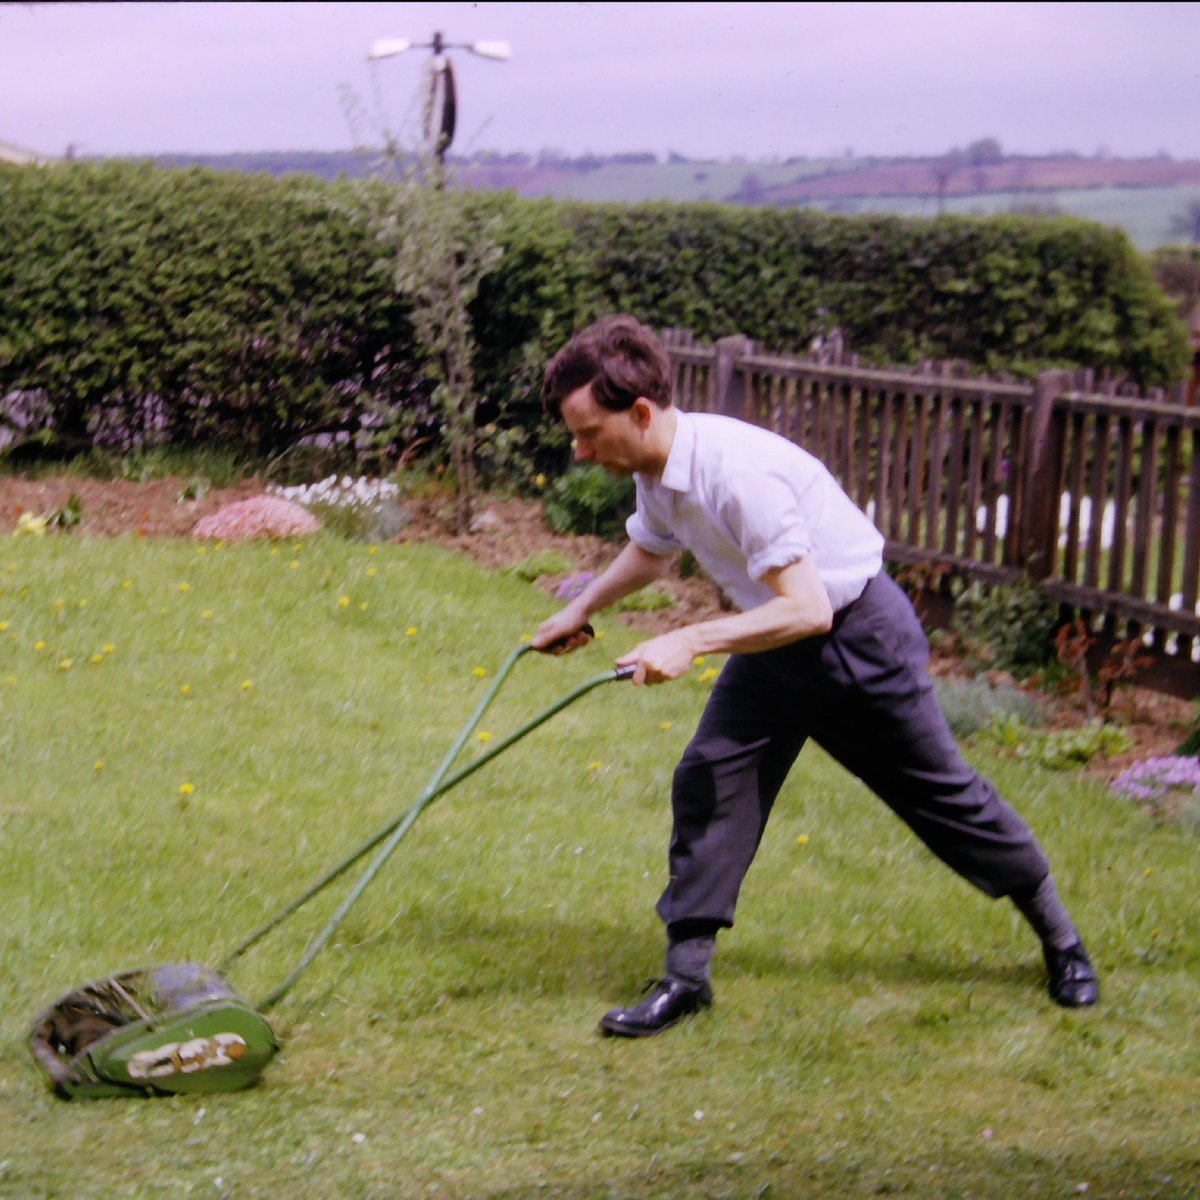 A joy to have a pub date - 3.7.25 - for my memoir 'Listen With Father' @unbound. So grateful to everyone who has supported it thus far: also available for pre-order here: unbound.com/books/listen-w…. Now here's a photo of my Dad mowing the lawn in 1963